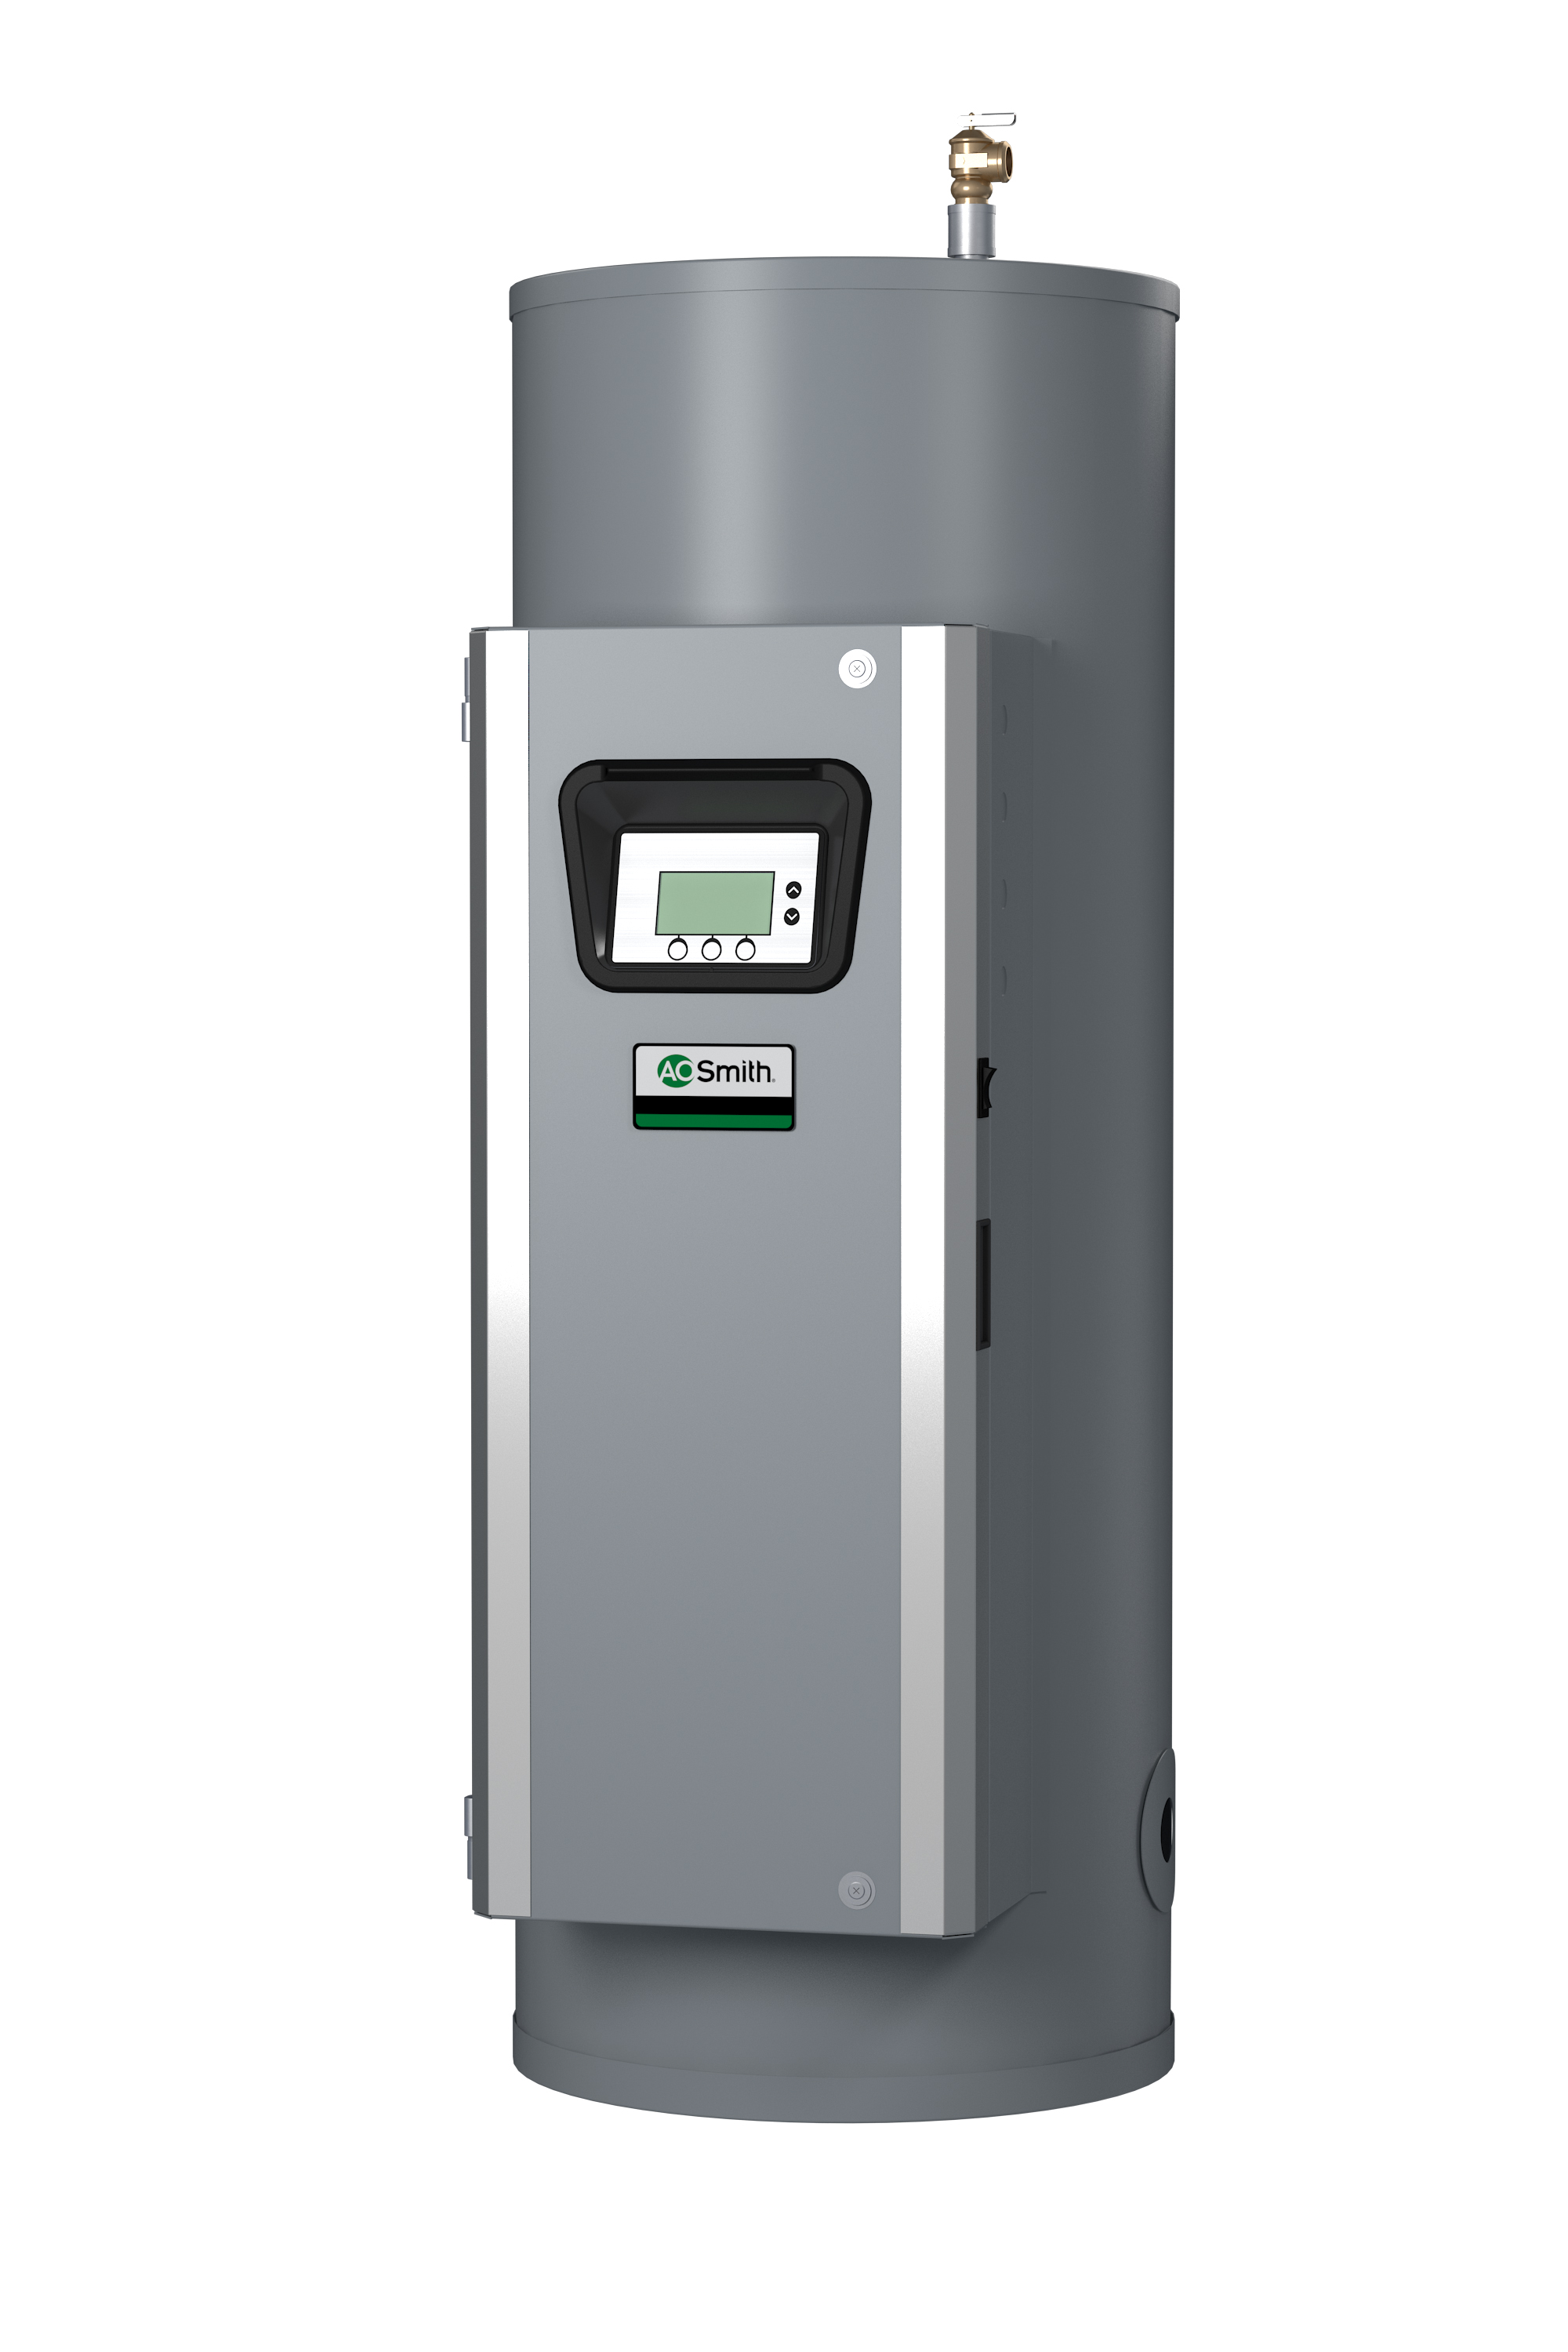 AO SMITH DSE-100A-18: 100 GALLONS, 18KW, 208 VOLT, 50 AMPS, 3 PHASE, 1 ELEMENT, ASME CUSTOM Xi SERIES HEAVY DUTY COMMERCIAL ELECTRIC WATER HEATER